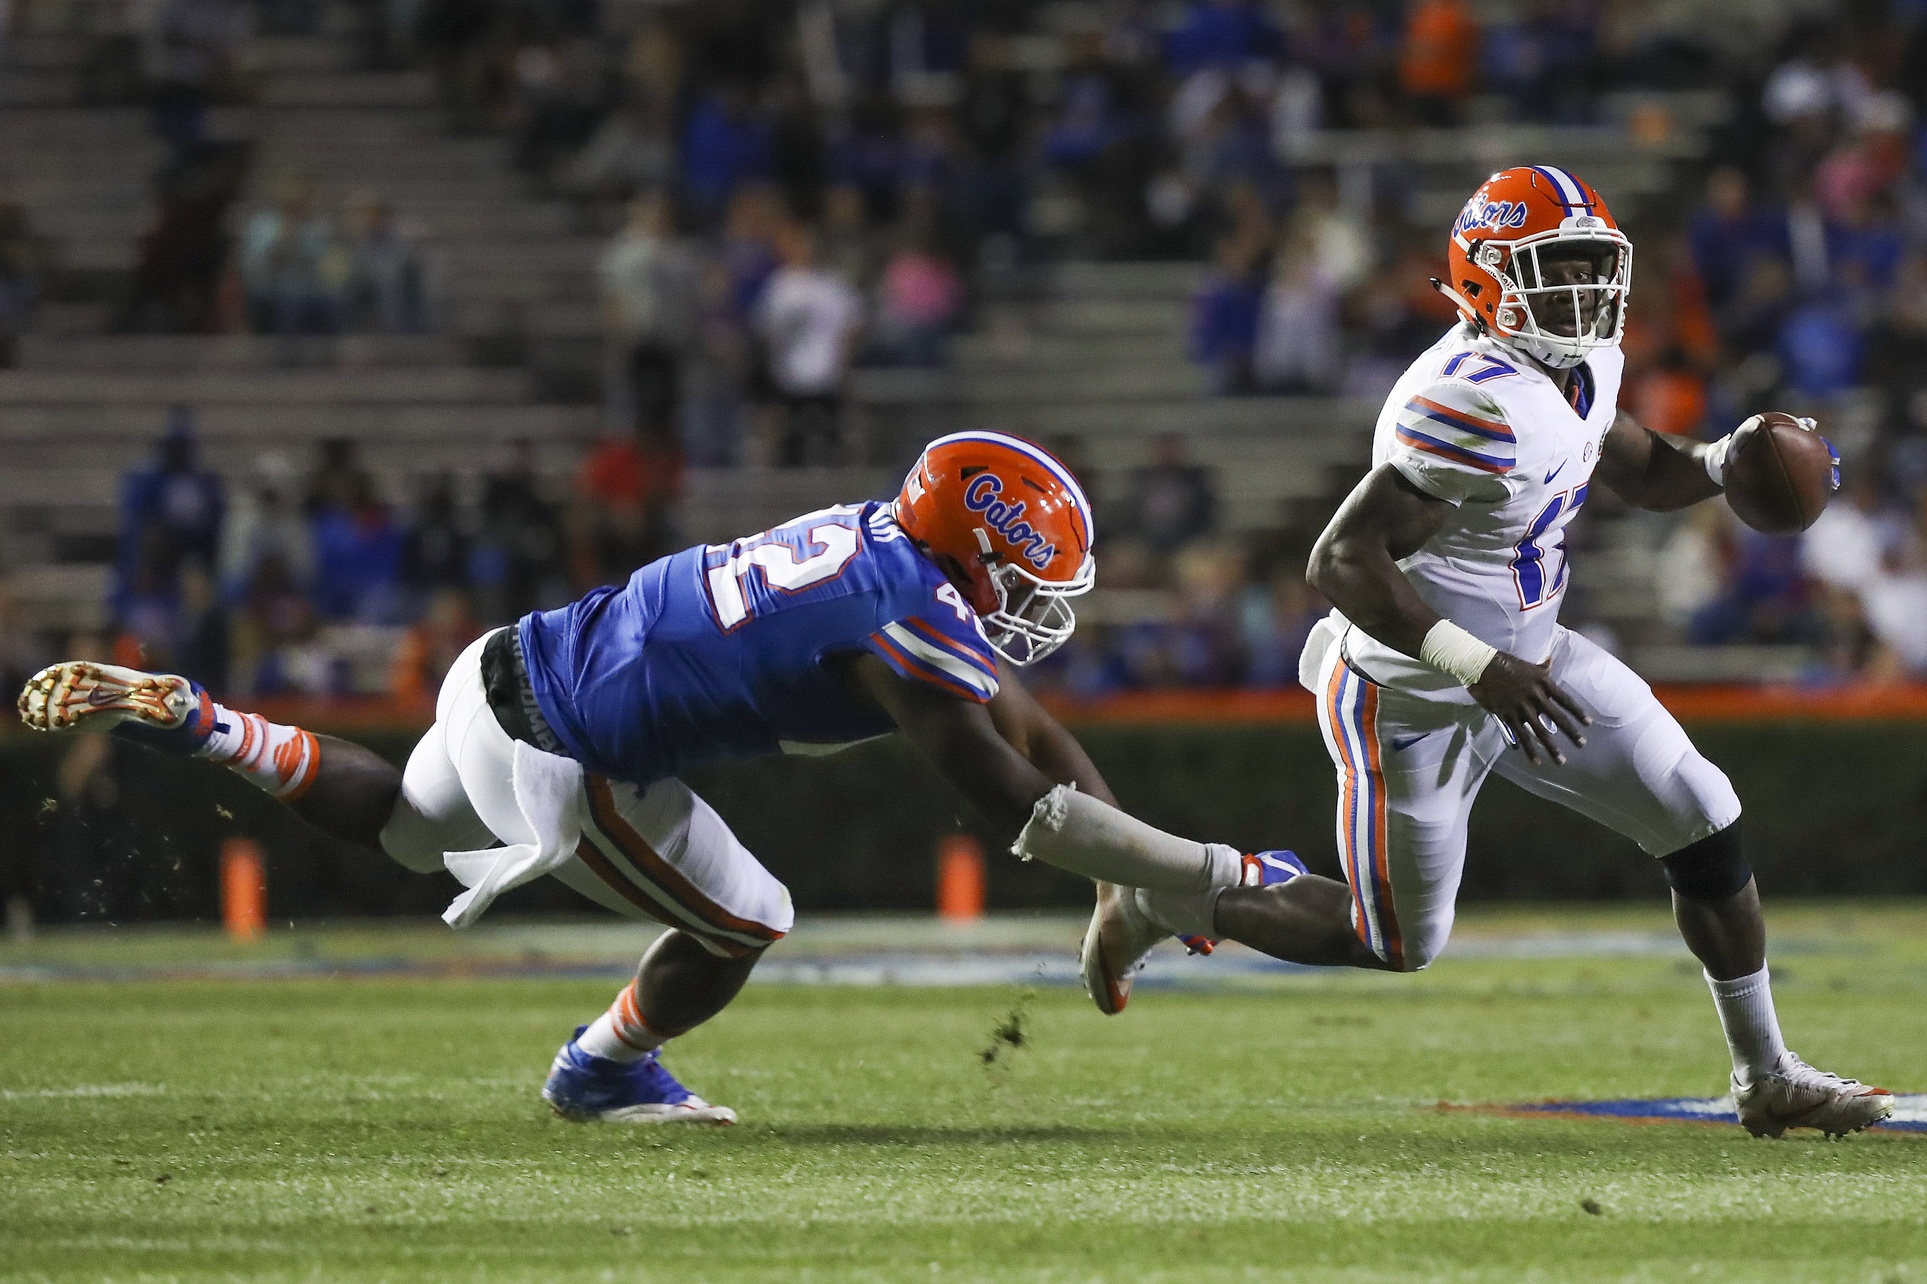 Gainesville Police Recommend More Charges for Gator Football Player